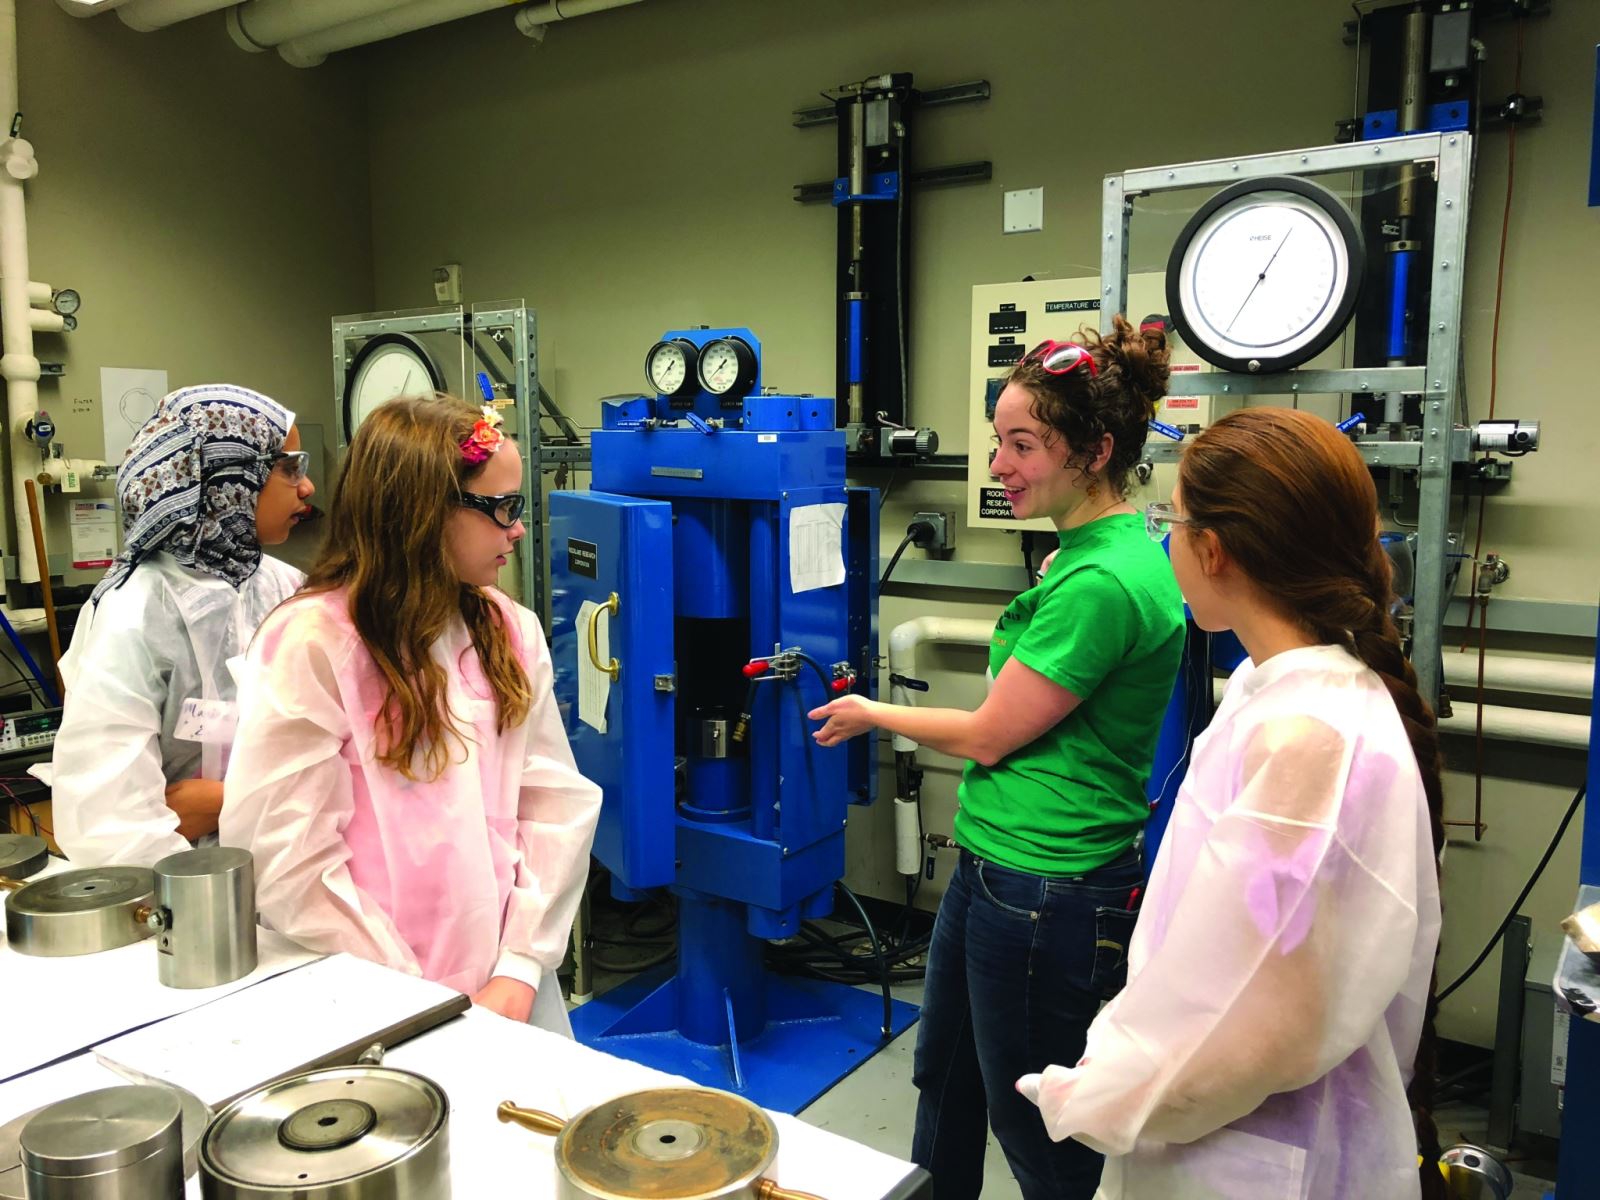 Students take a tour of the laboratory facilities